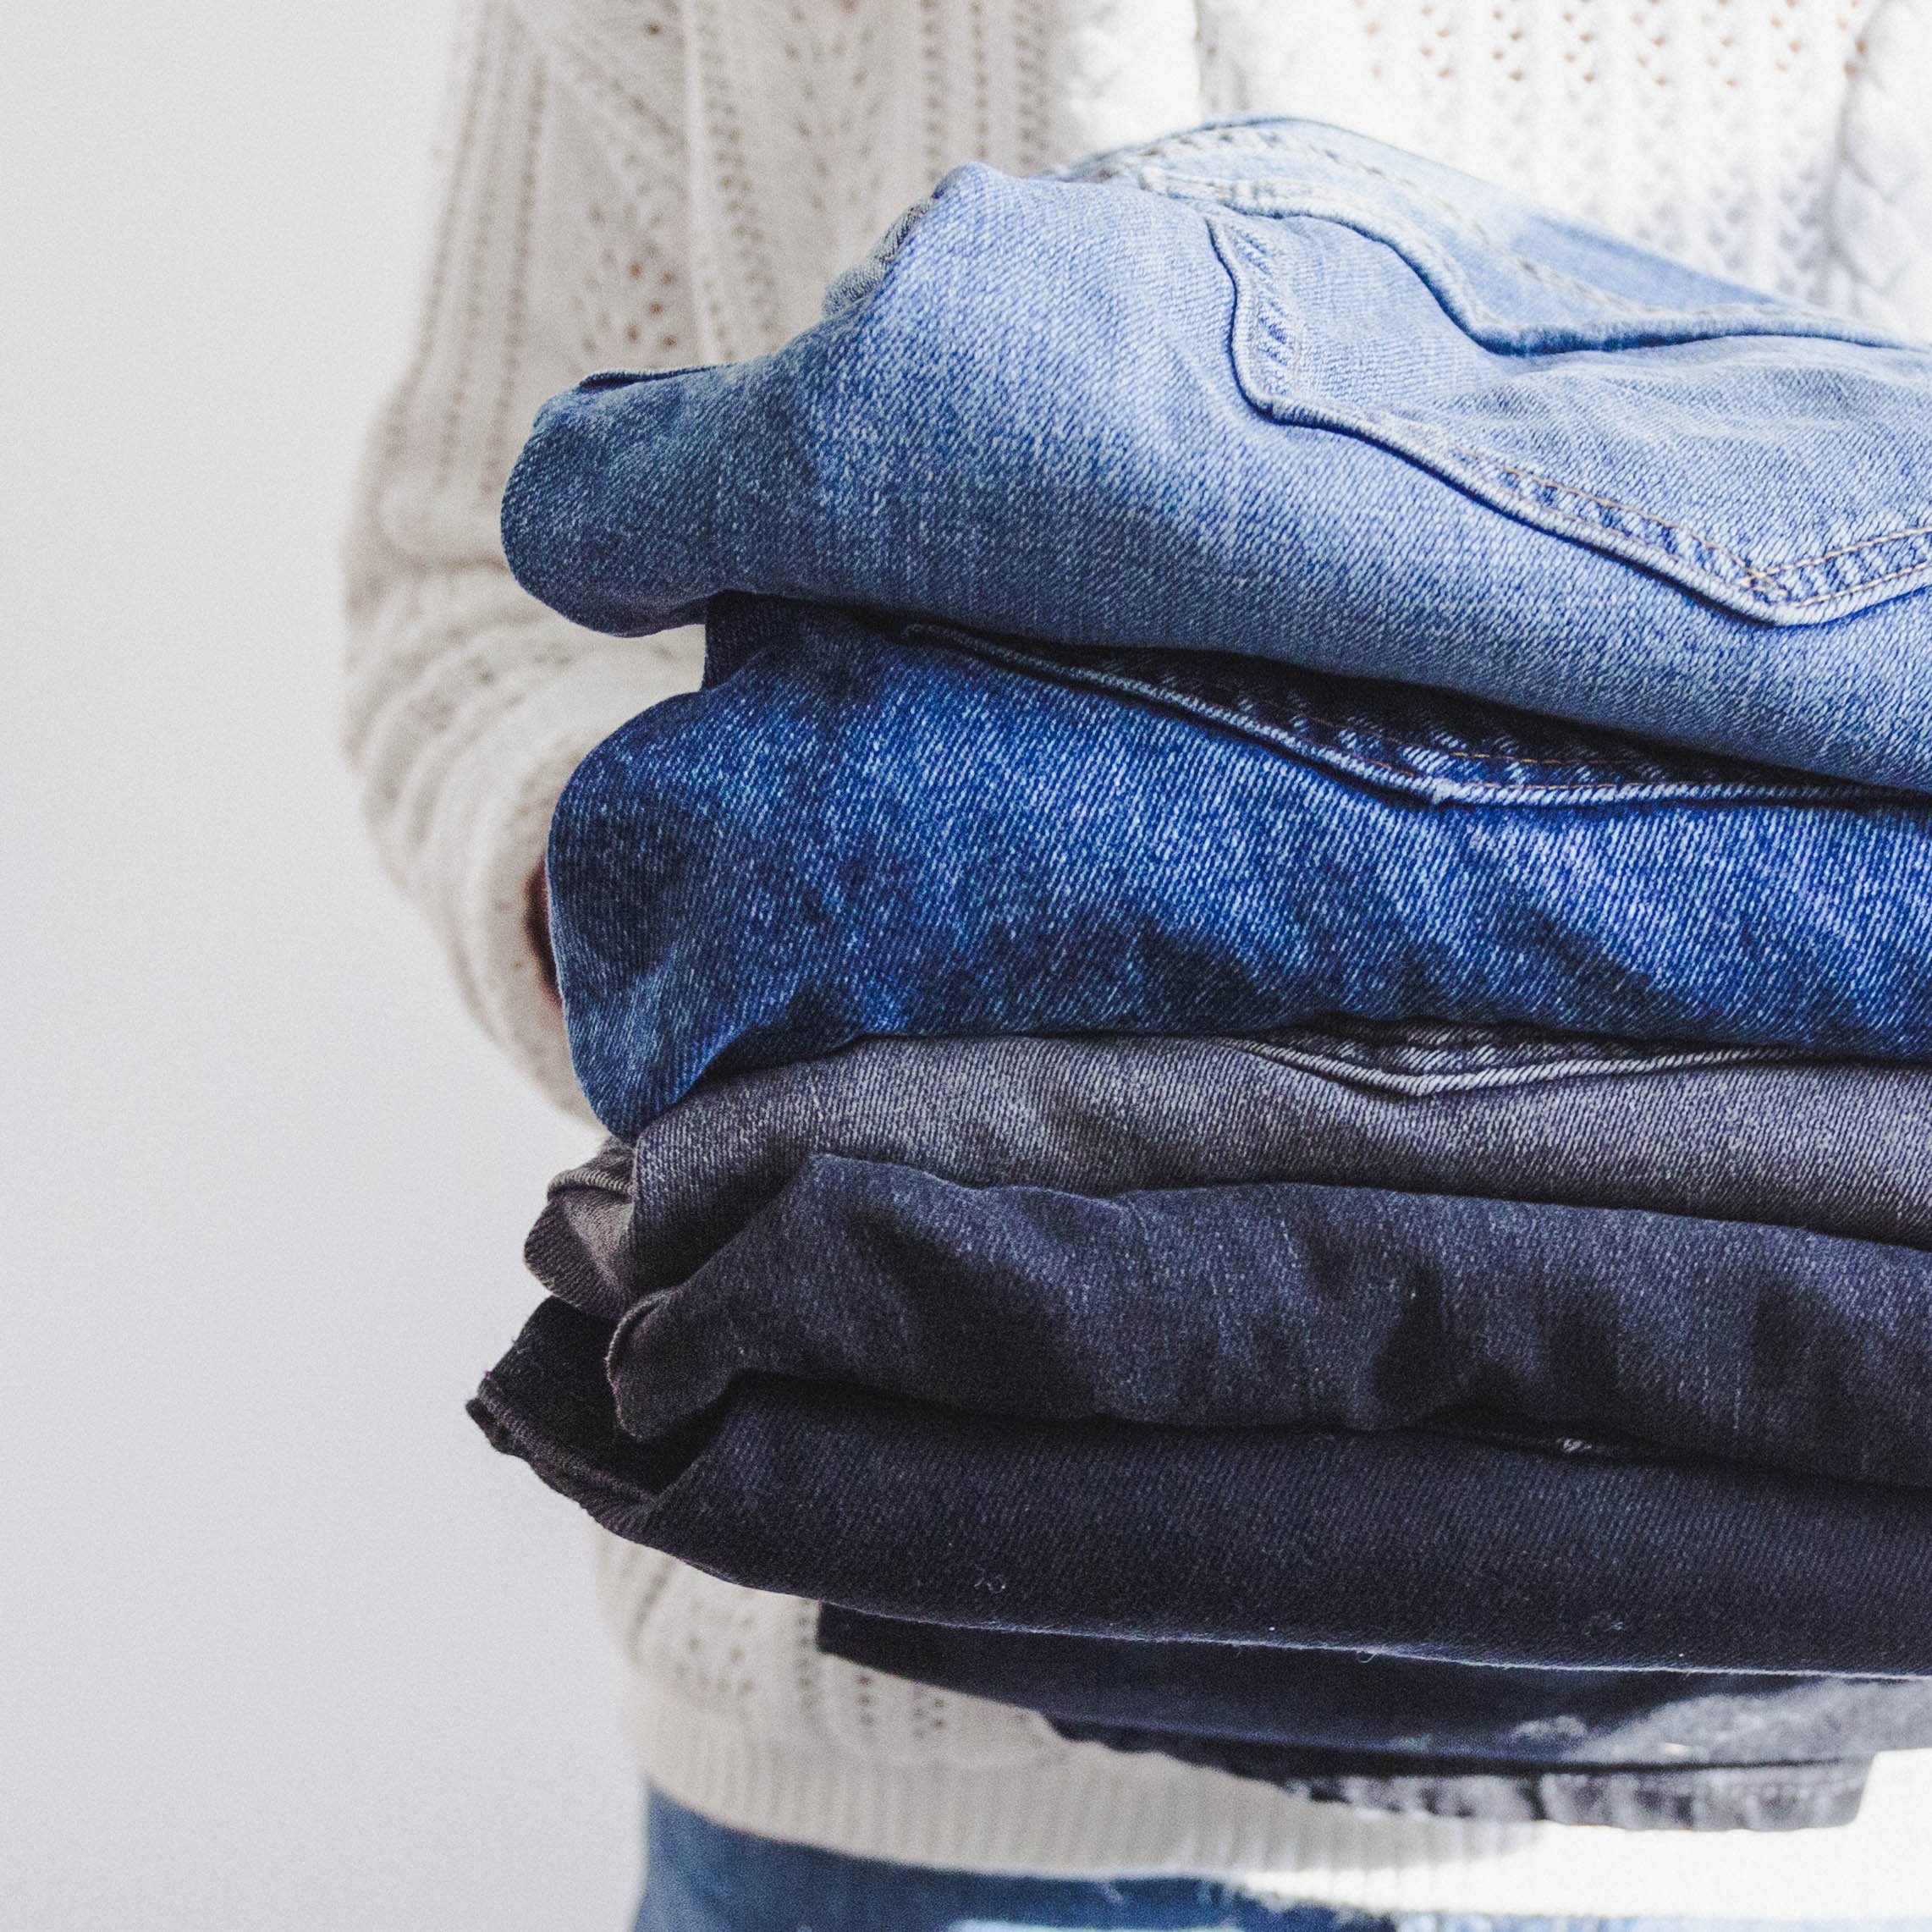 genstand Juster Bevis 6 Affordable Sustainable & Ethical Denim Jeans Brands — The Honest Consumer